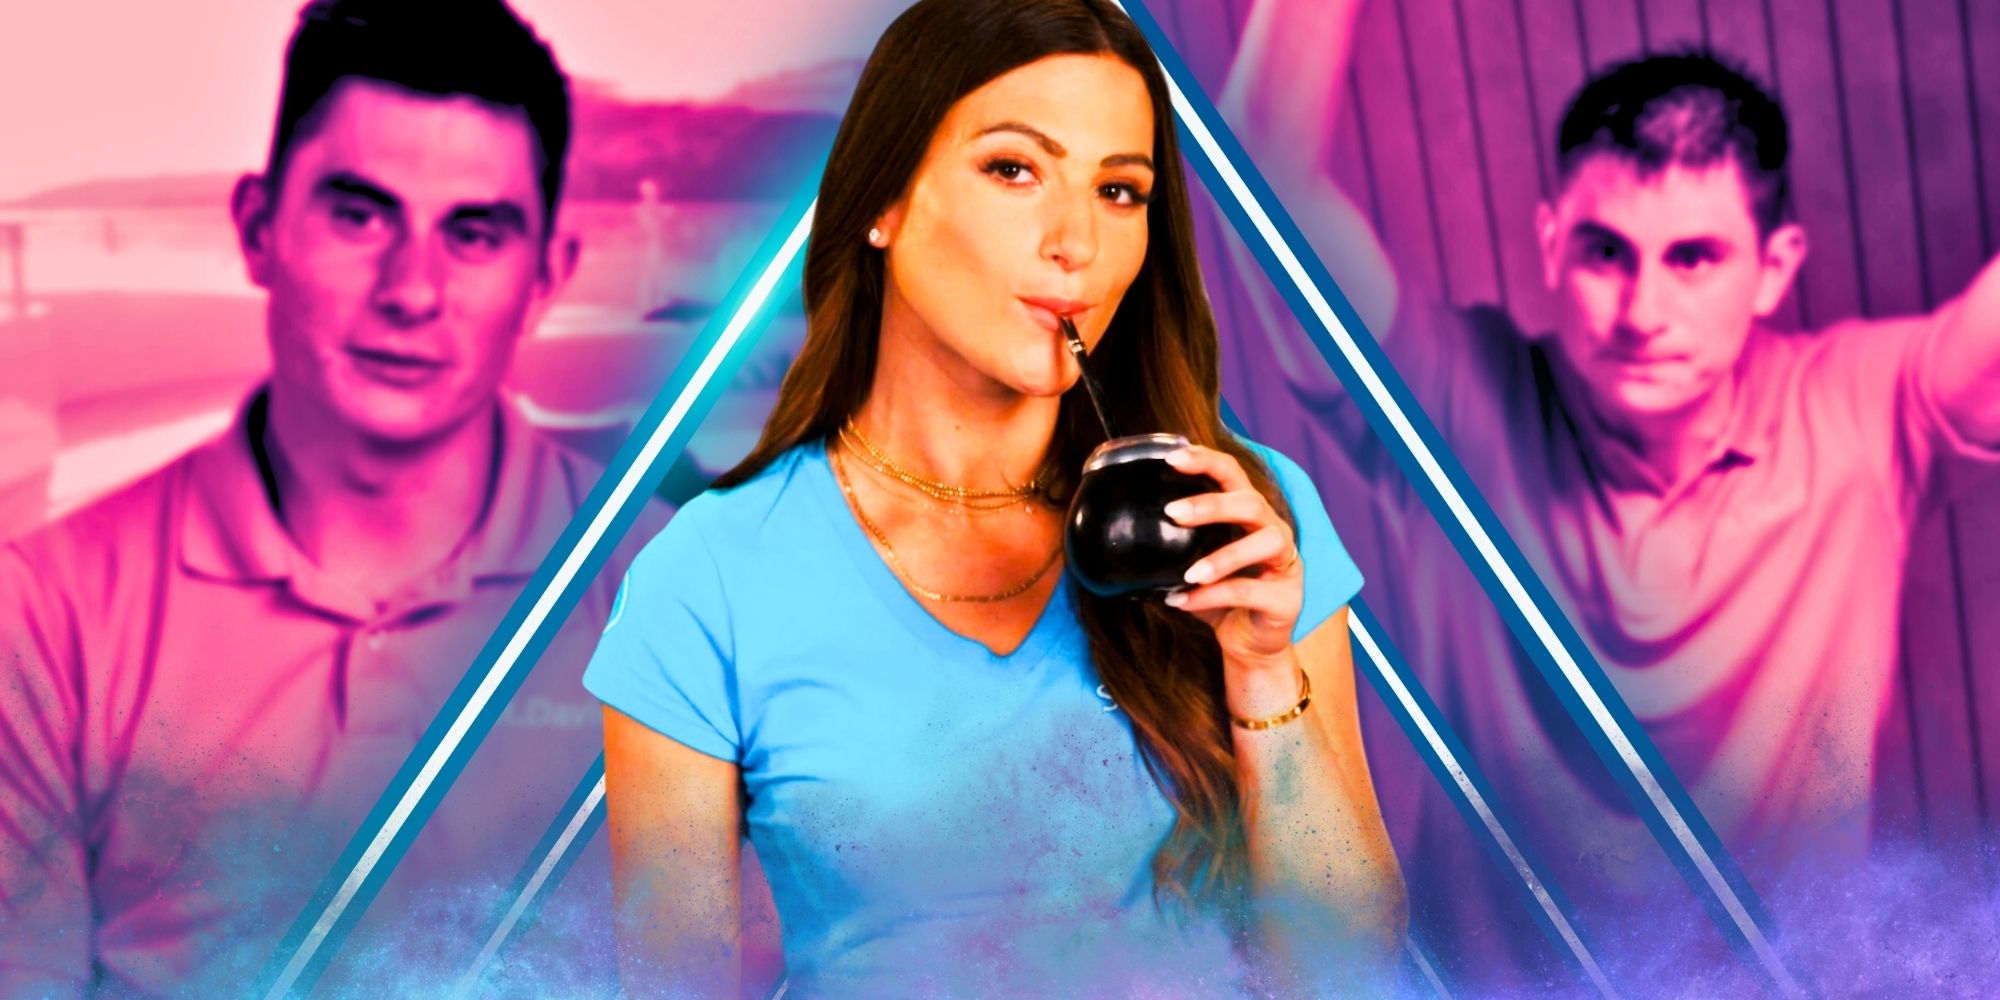 Montage of Below Deck's Barbie Pascual & Kyle Stillie, with Barbie drinking a beverage